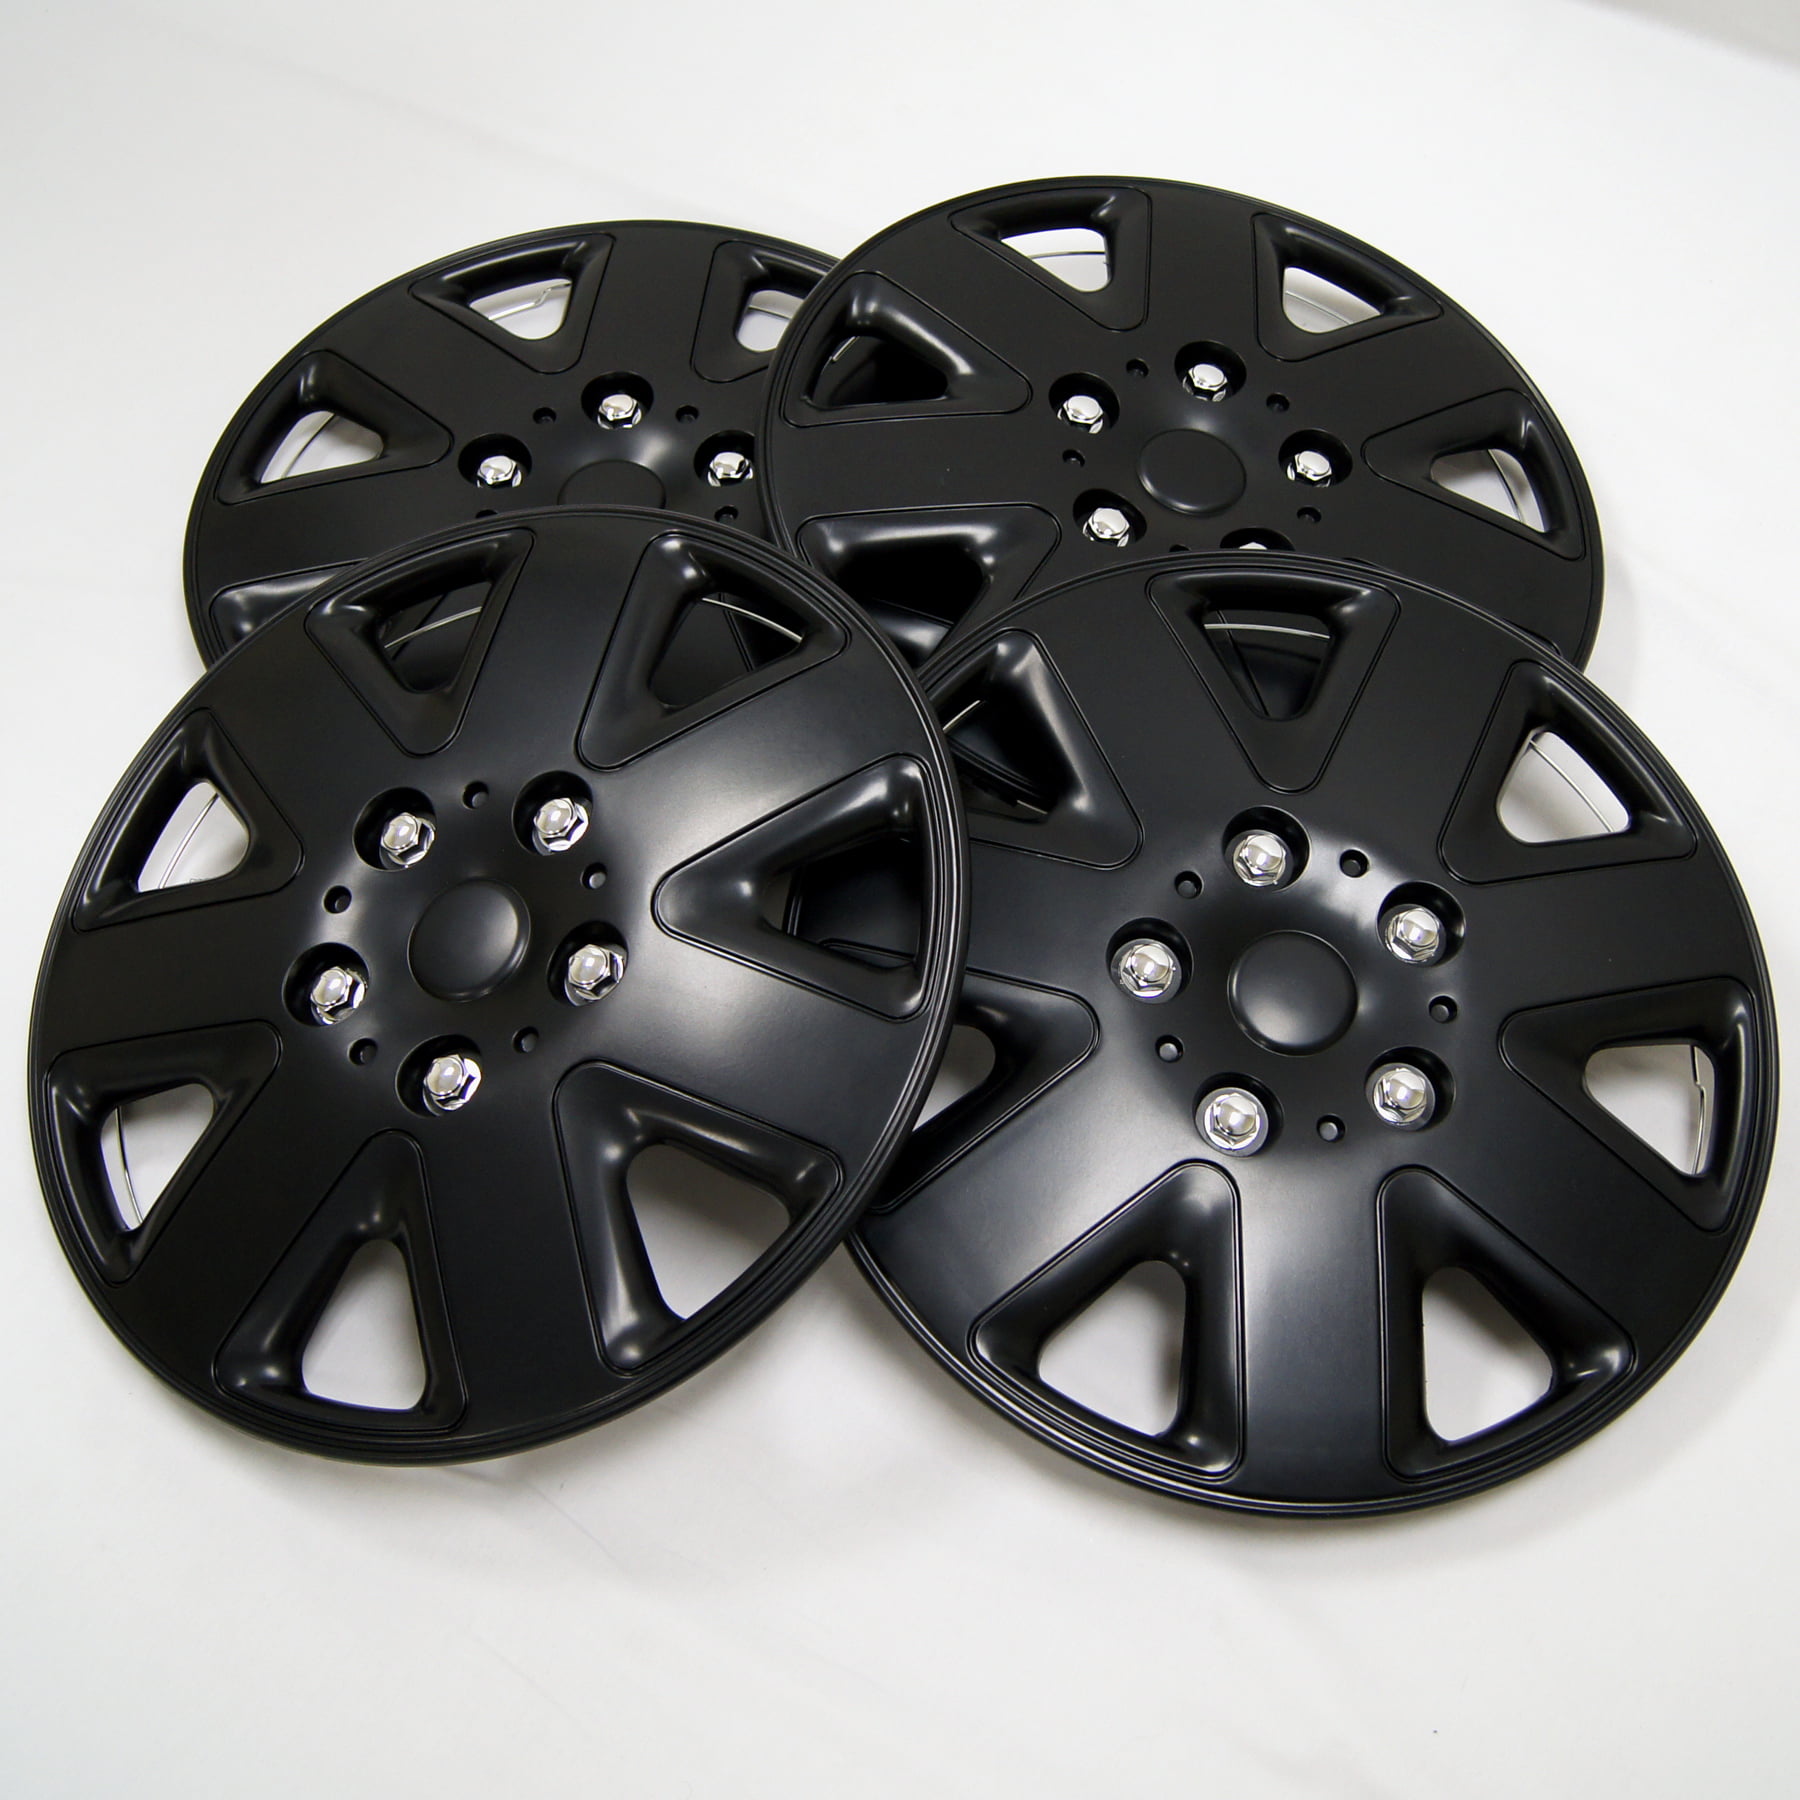 TuningPros WSC-026B16 Hubcaps Wheel Skin Cover 16-Inches Matte Black Set of 4 